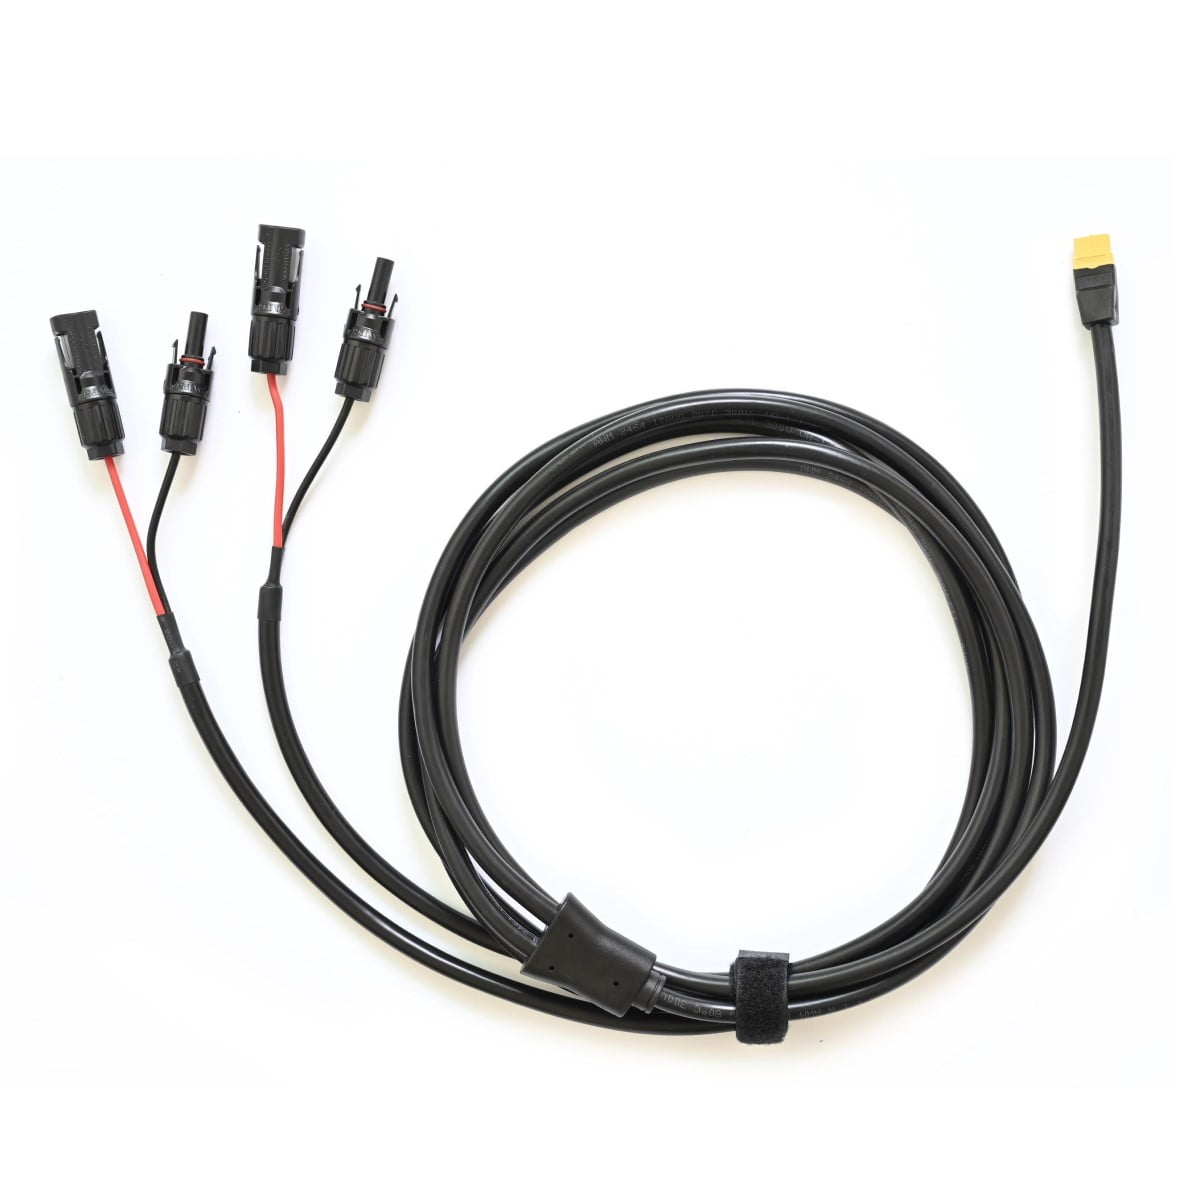 Series Connection Cable MC4 Compatible to XT60 3 Metres